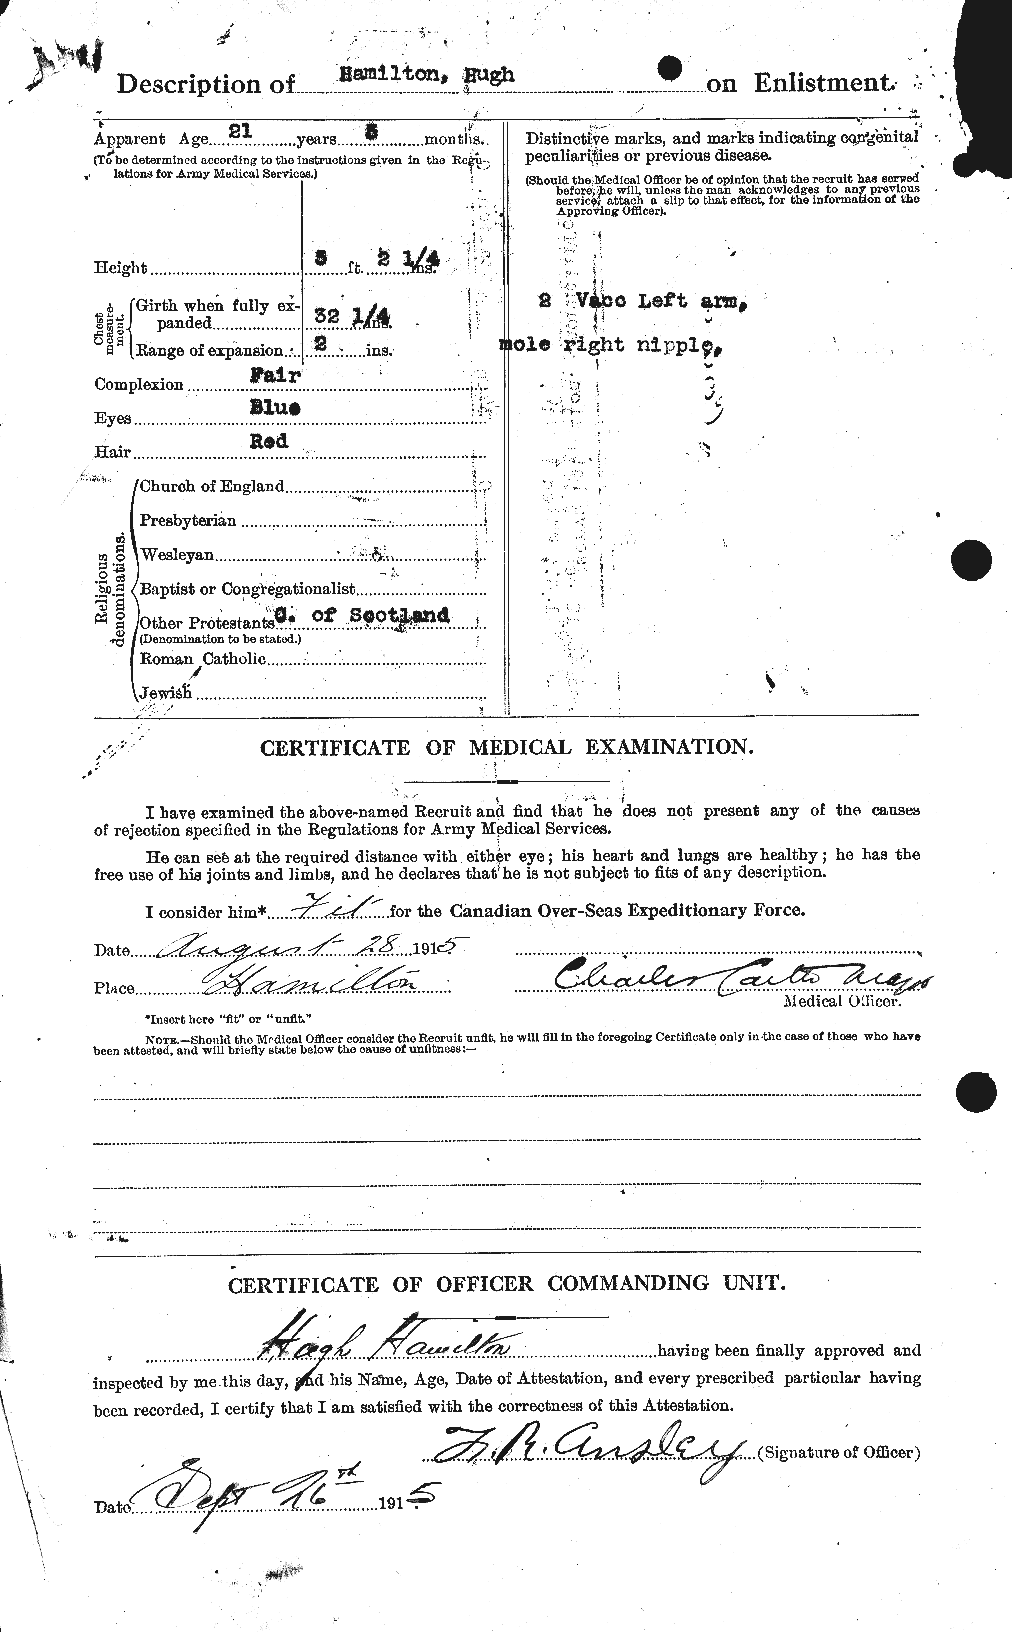 Personnel Records of the First World War - CEF 372910b